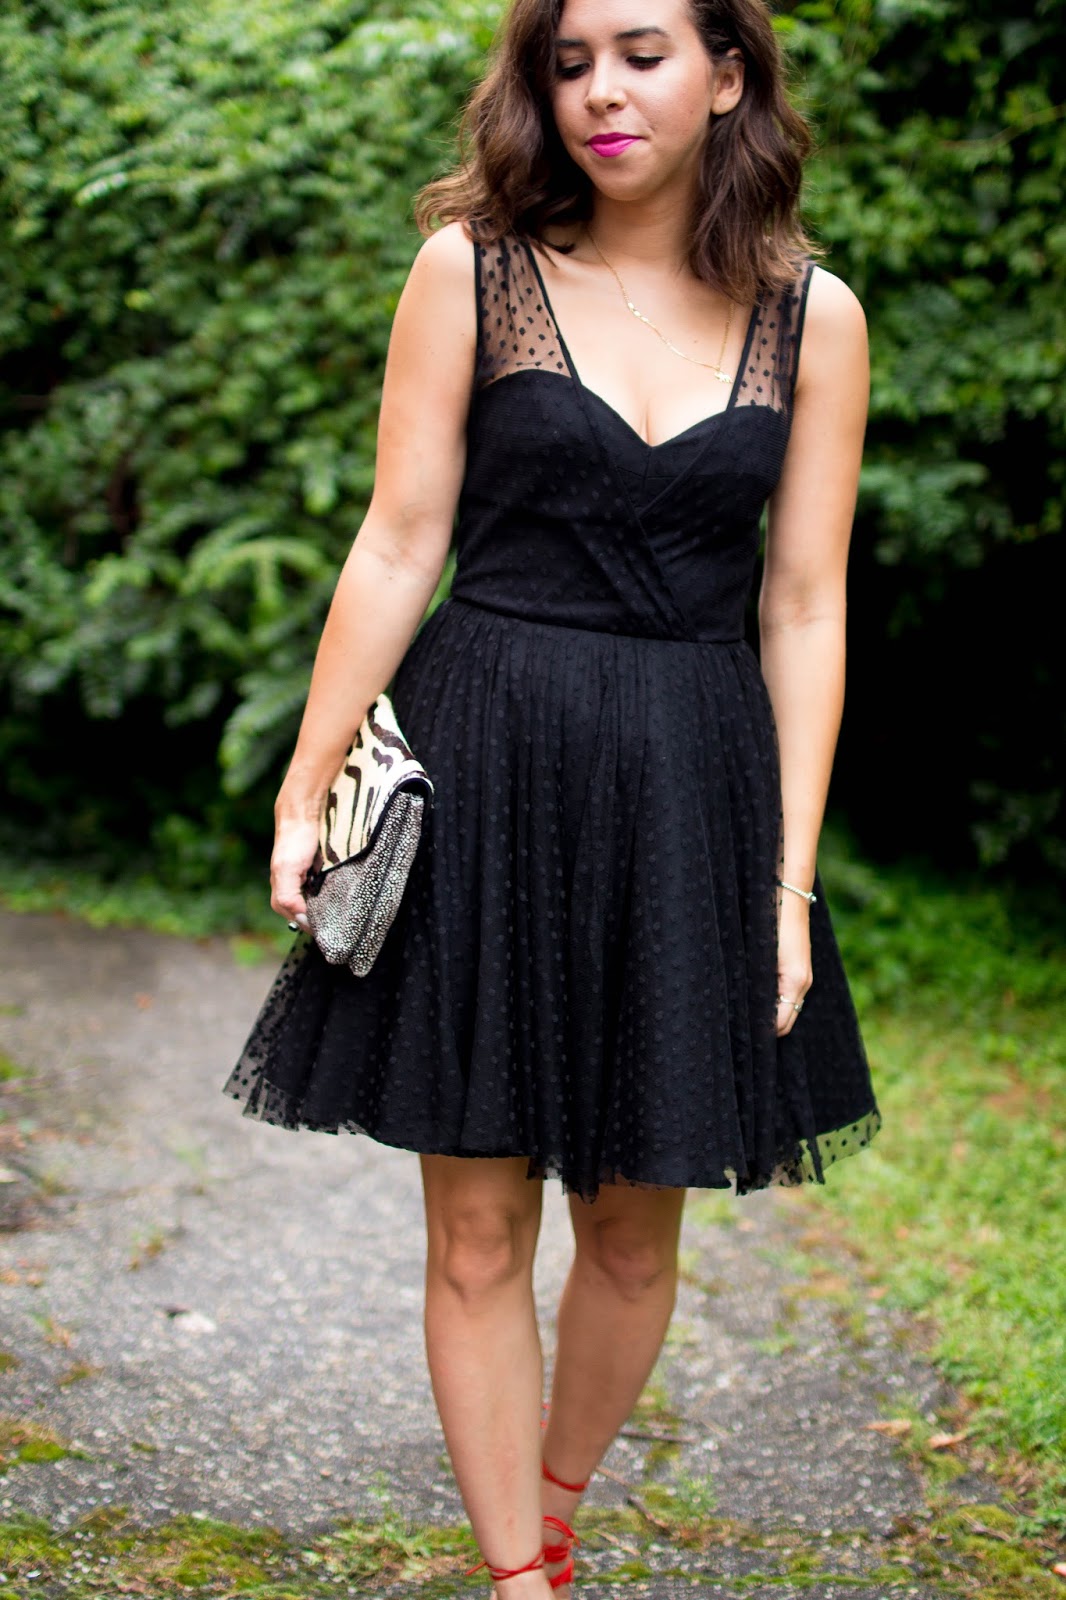 How to wear black to a summer wedding. | A.Viza Style | milly rent the runway dress - wedding guest outfit - dc blogger